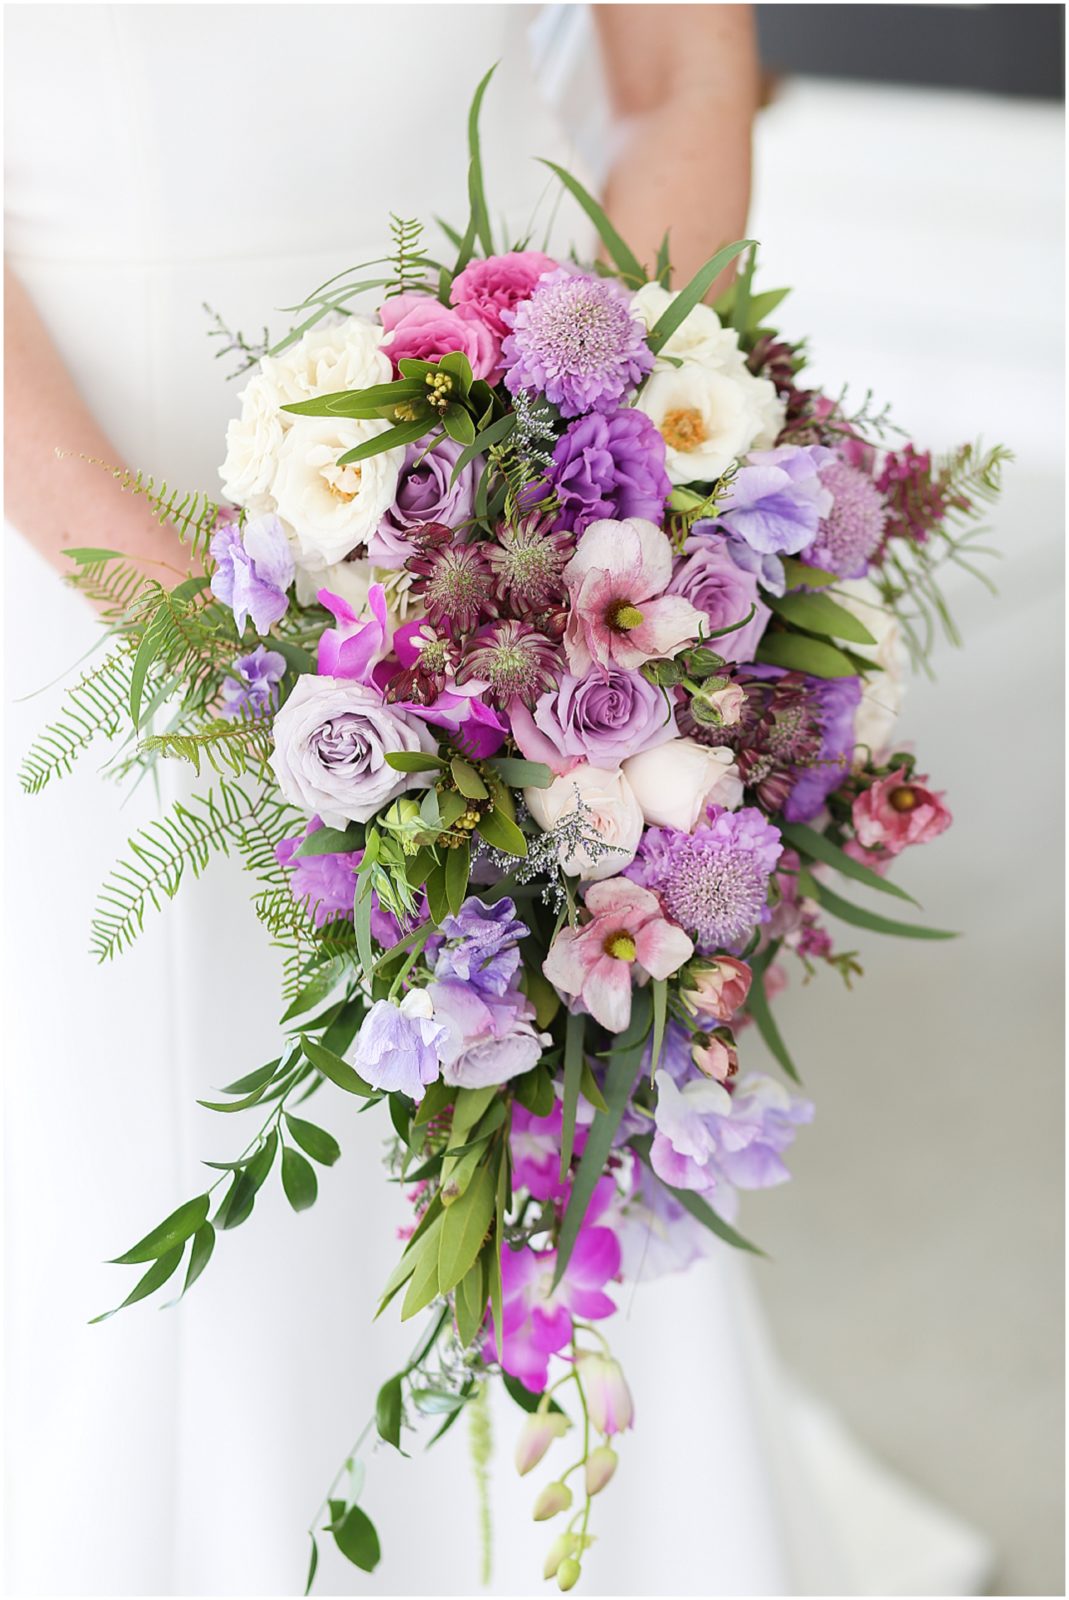 LAVENDER DRAPED WEDDING BOUQUET - THE FIELDS AT 1890 - WEDDING PHOTOGRAPHY BY MARIAM SAIFAN - INSPIRATIONAL WEDDING BOUQUET AND FLOWERS - KC WEDDING VENUES - KC WEDDING FLORIST - KC WEDDING PHOTOGRAPHER 